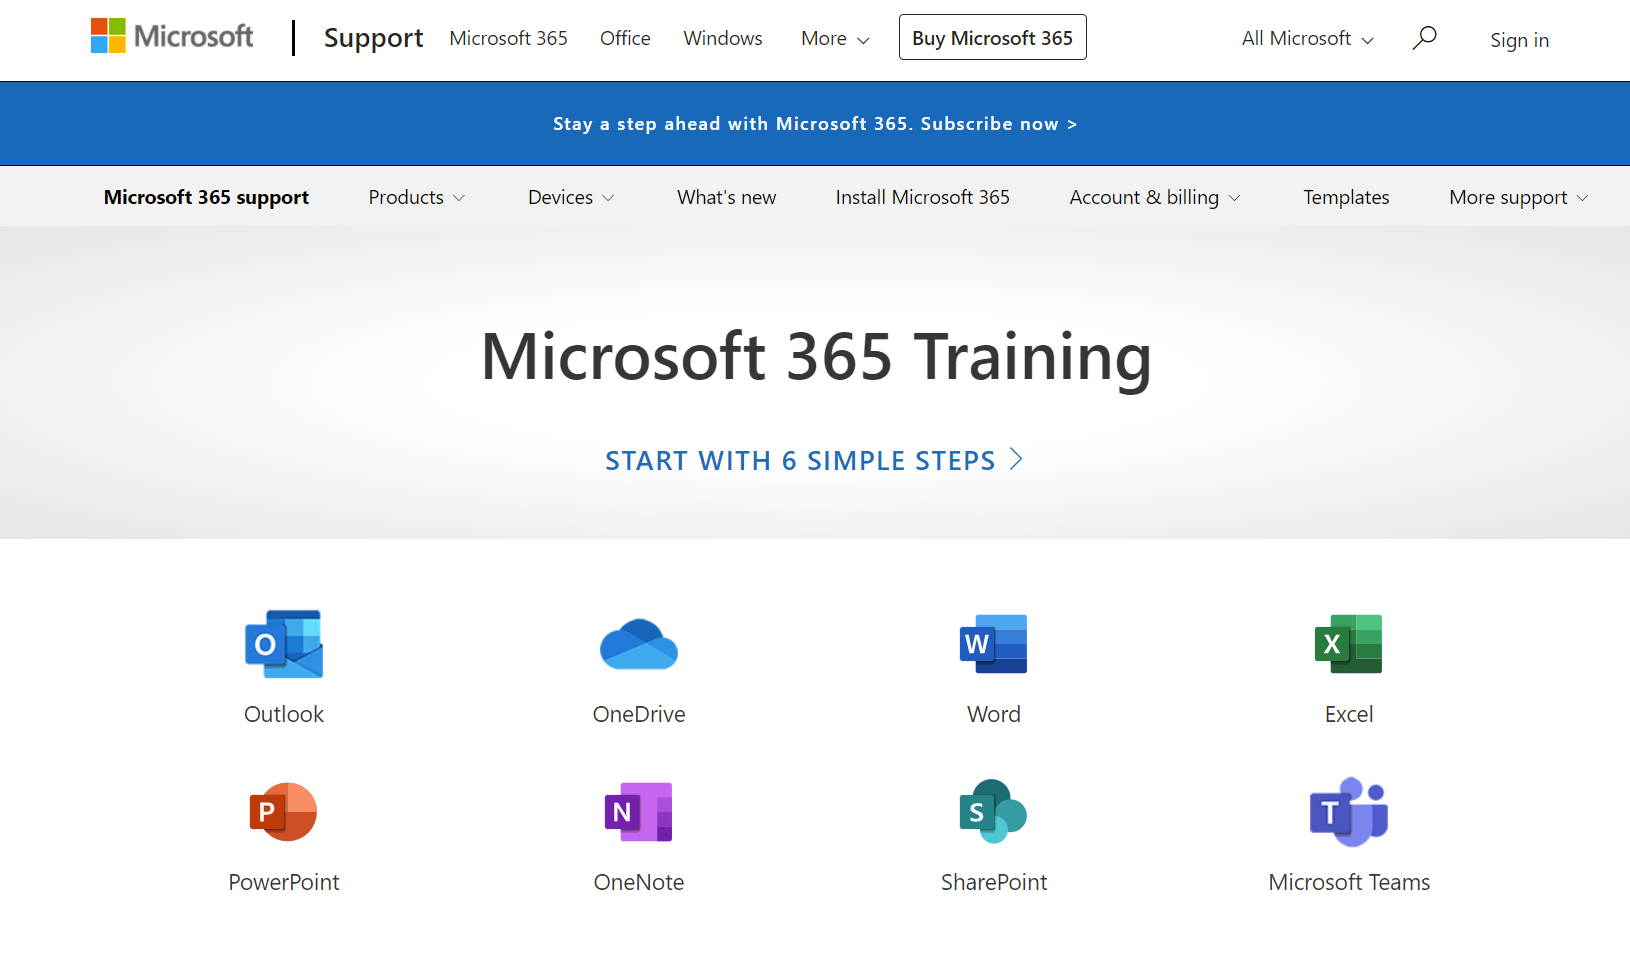 The Microsoft 365 Training homepage on the official site.